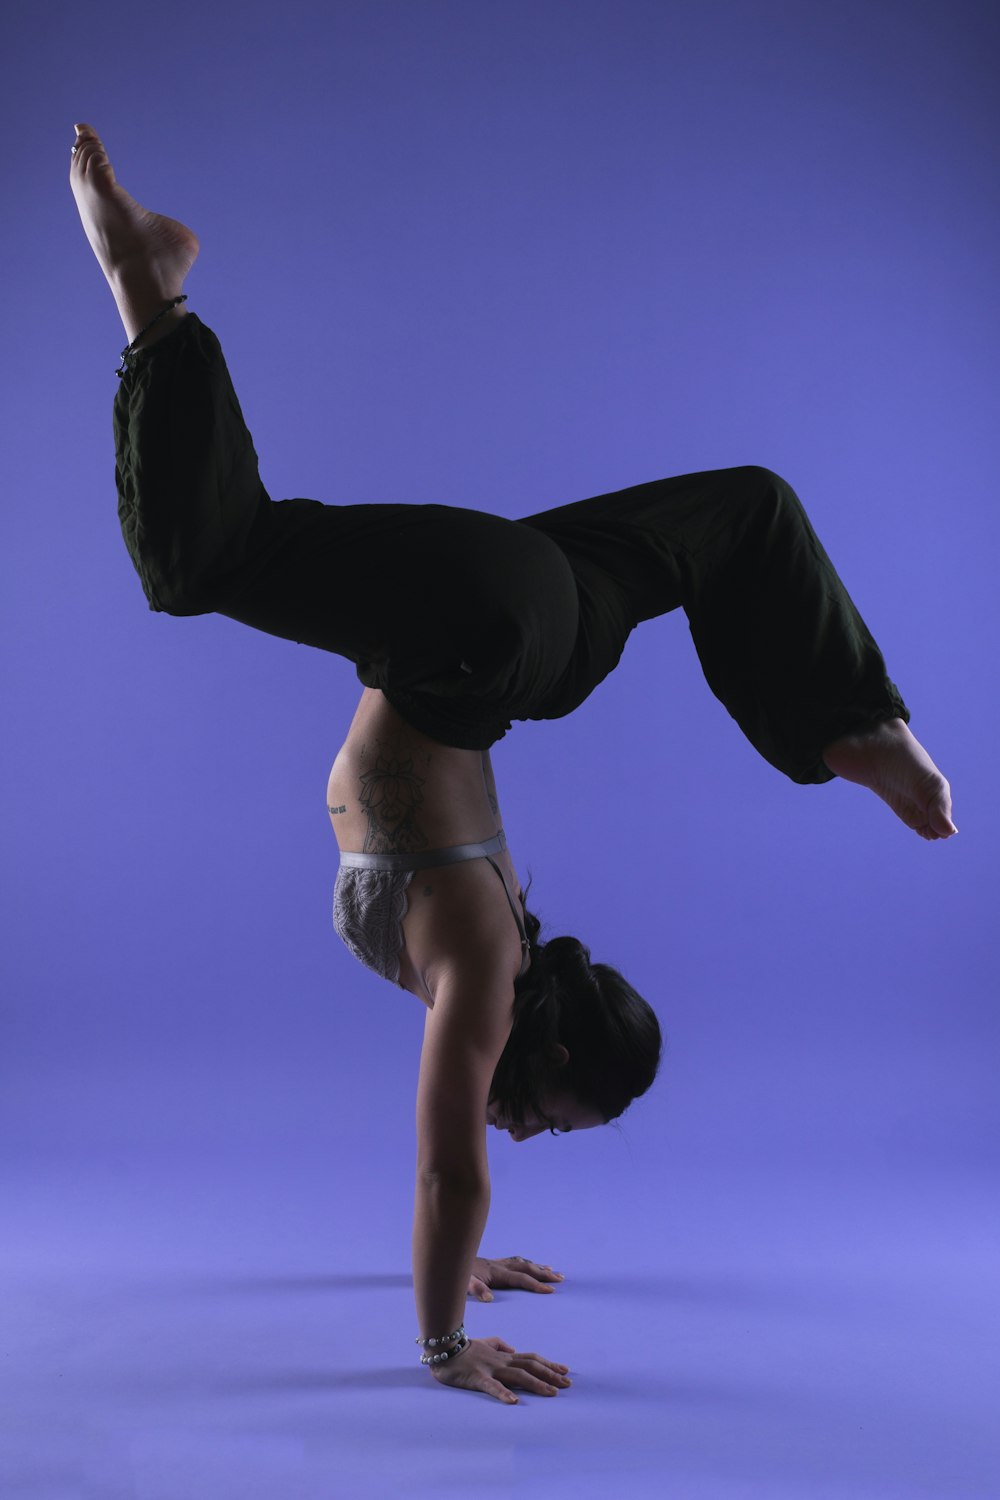 a person doing a handstand on a blue background